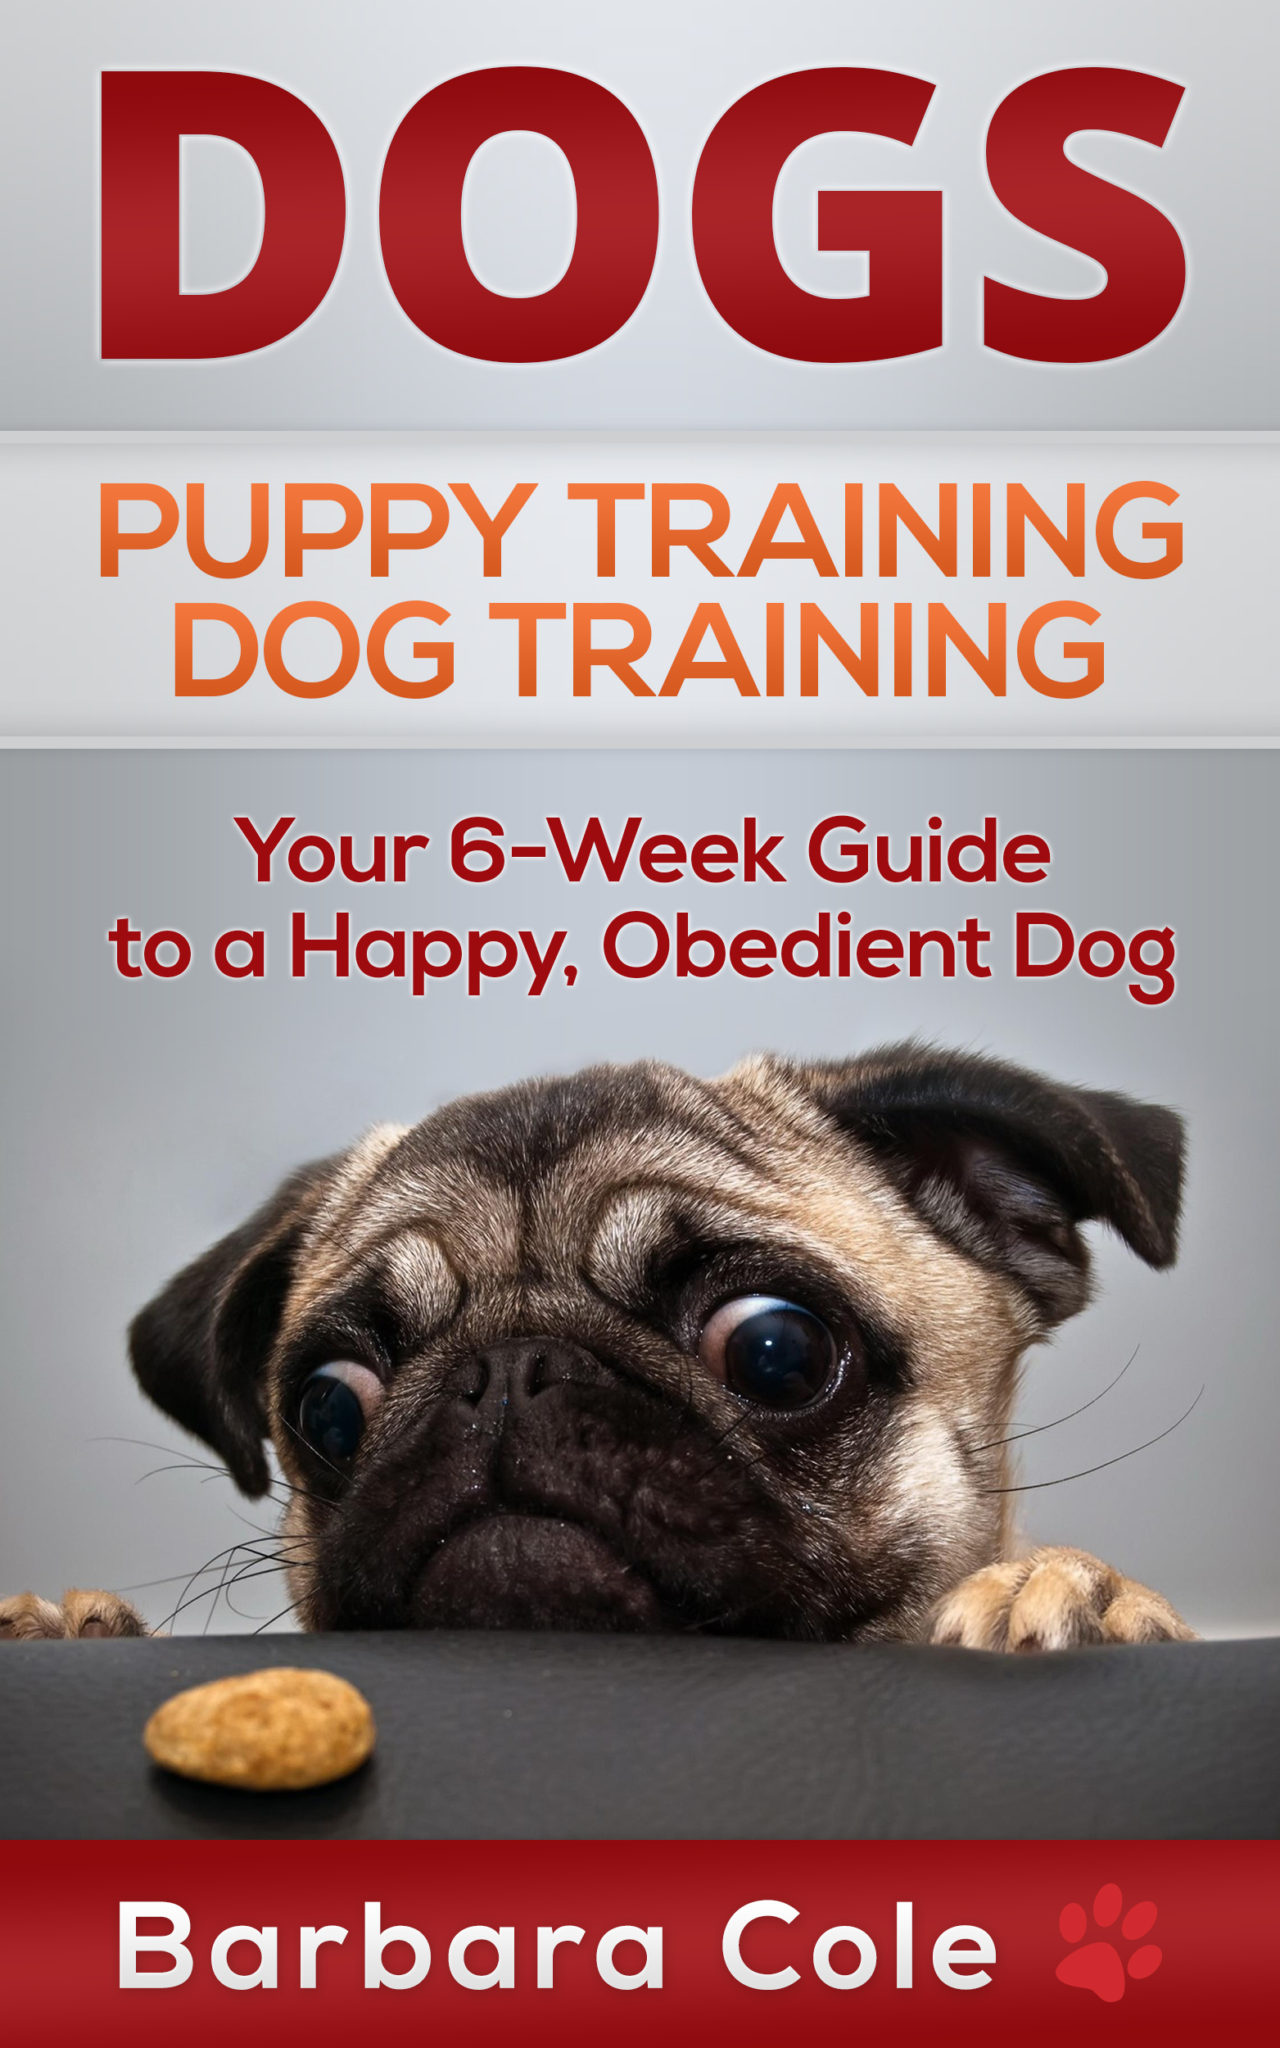 Dogs: Puppy Training, Dog Training – Your Simple 6-Week Guide to Puppy & Dog Obedience by Barbara Cole